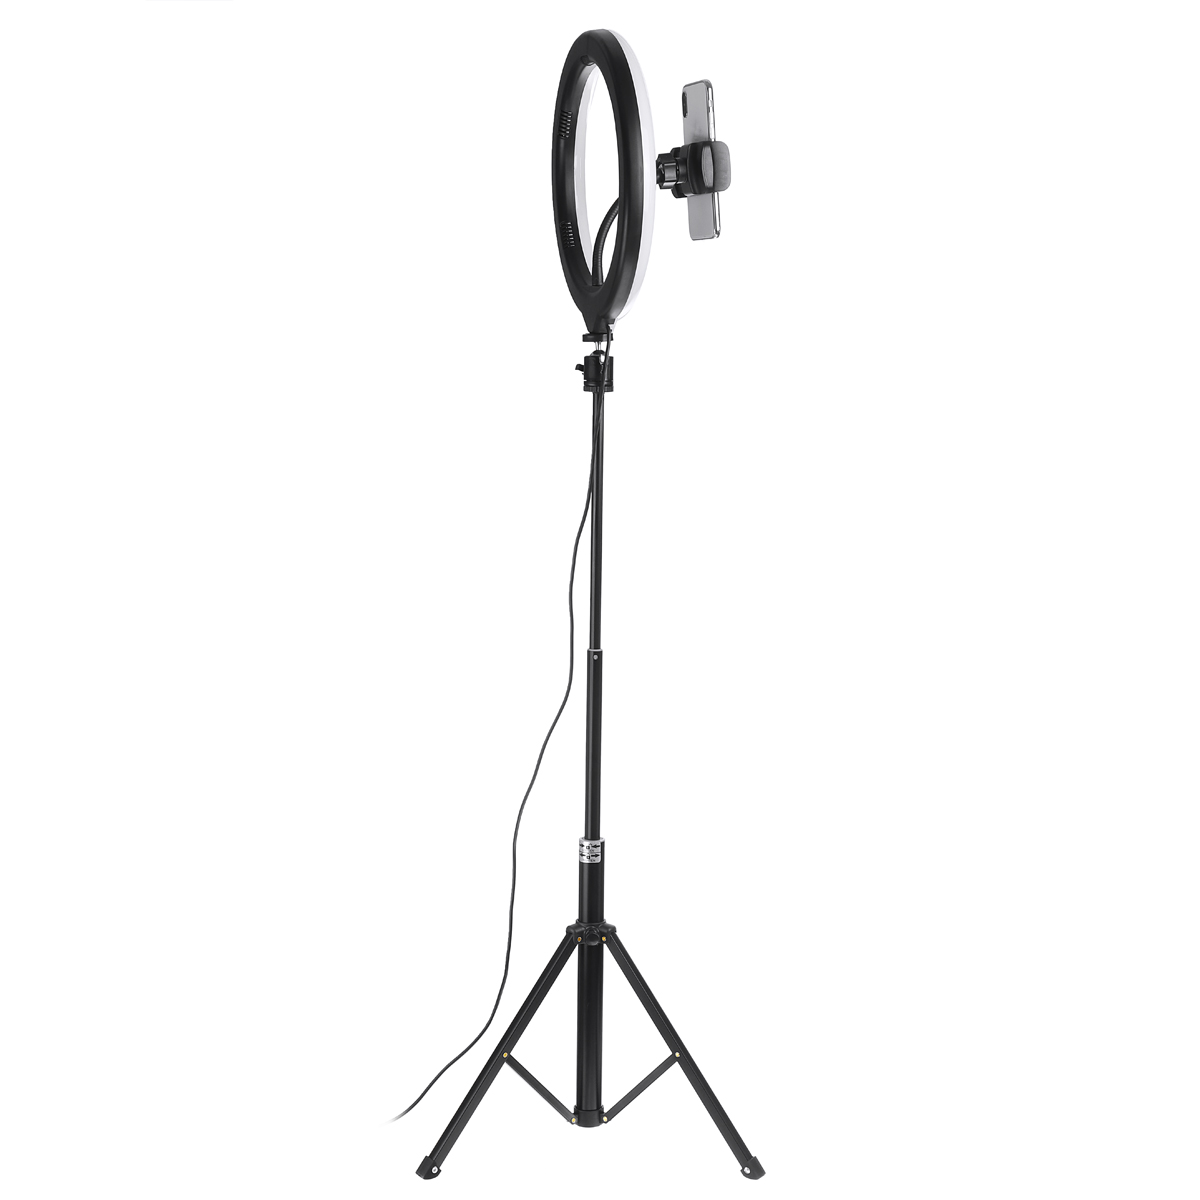 Bakeey-10inch-LED-Ring-Light-Portable-Telescopic-Tripod-Fill-Light-Dimmable-Flexible-Stand-Phone-Hol-1746941-2